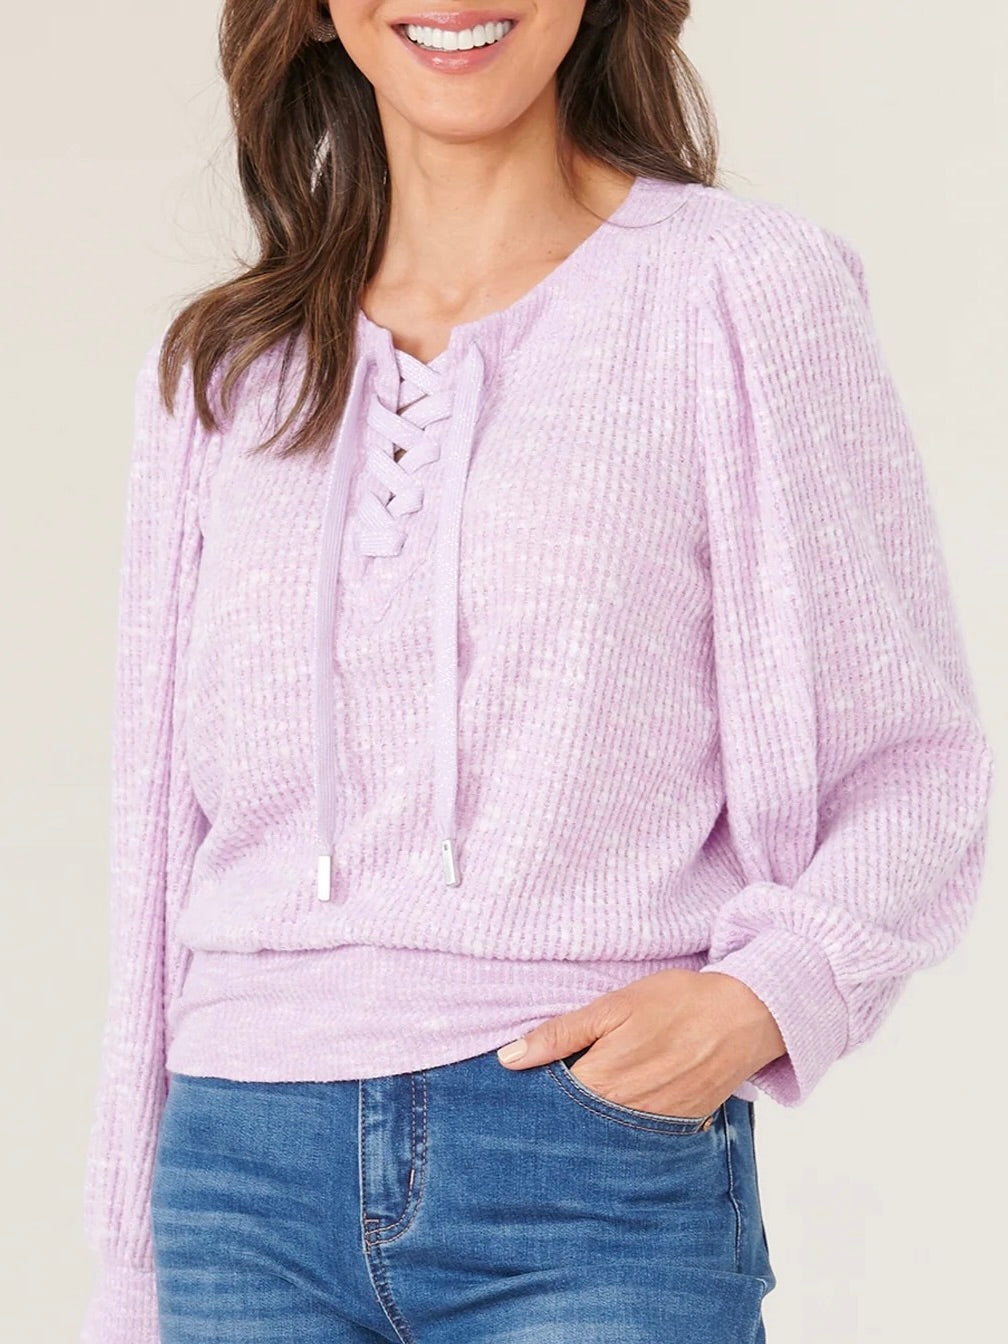 Lace-Up Thermal Top - Heather Orchid